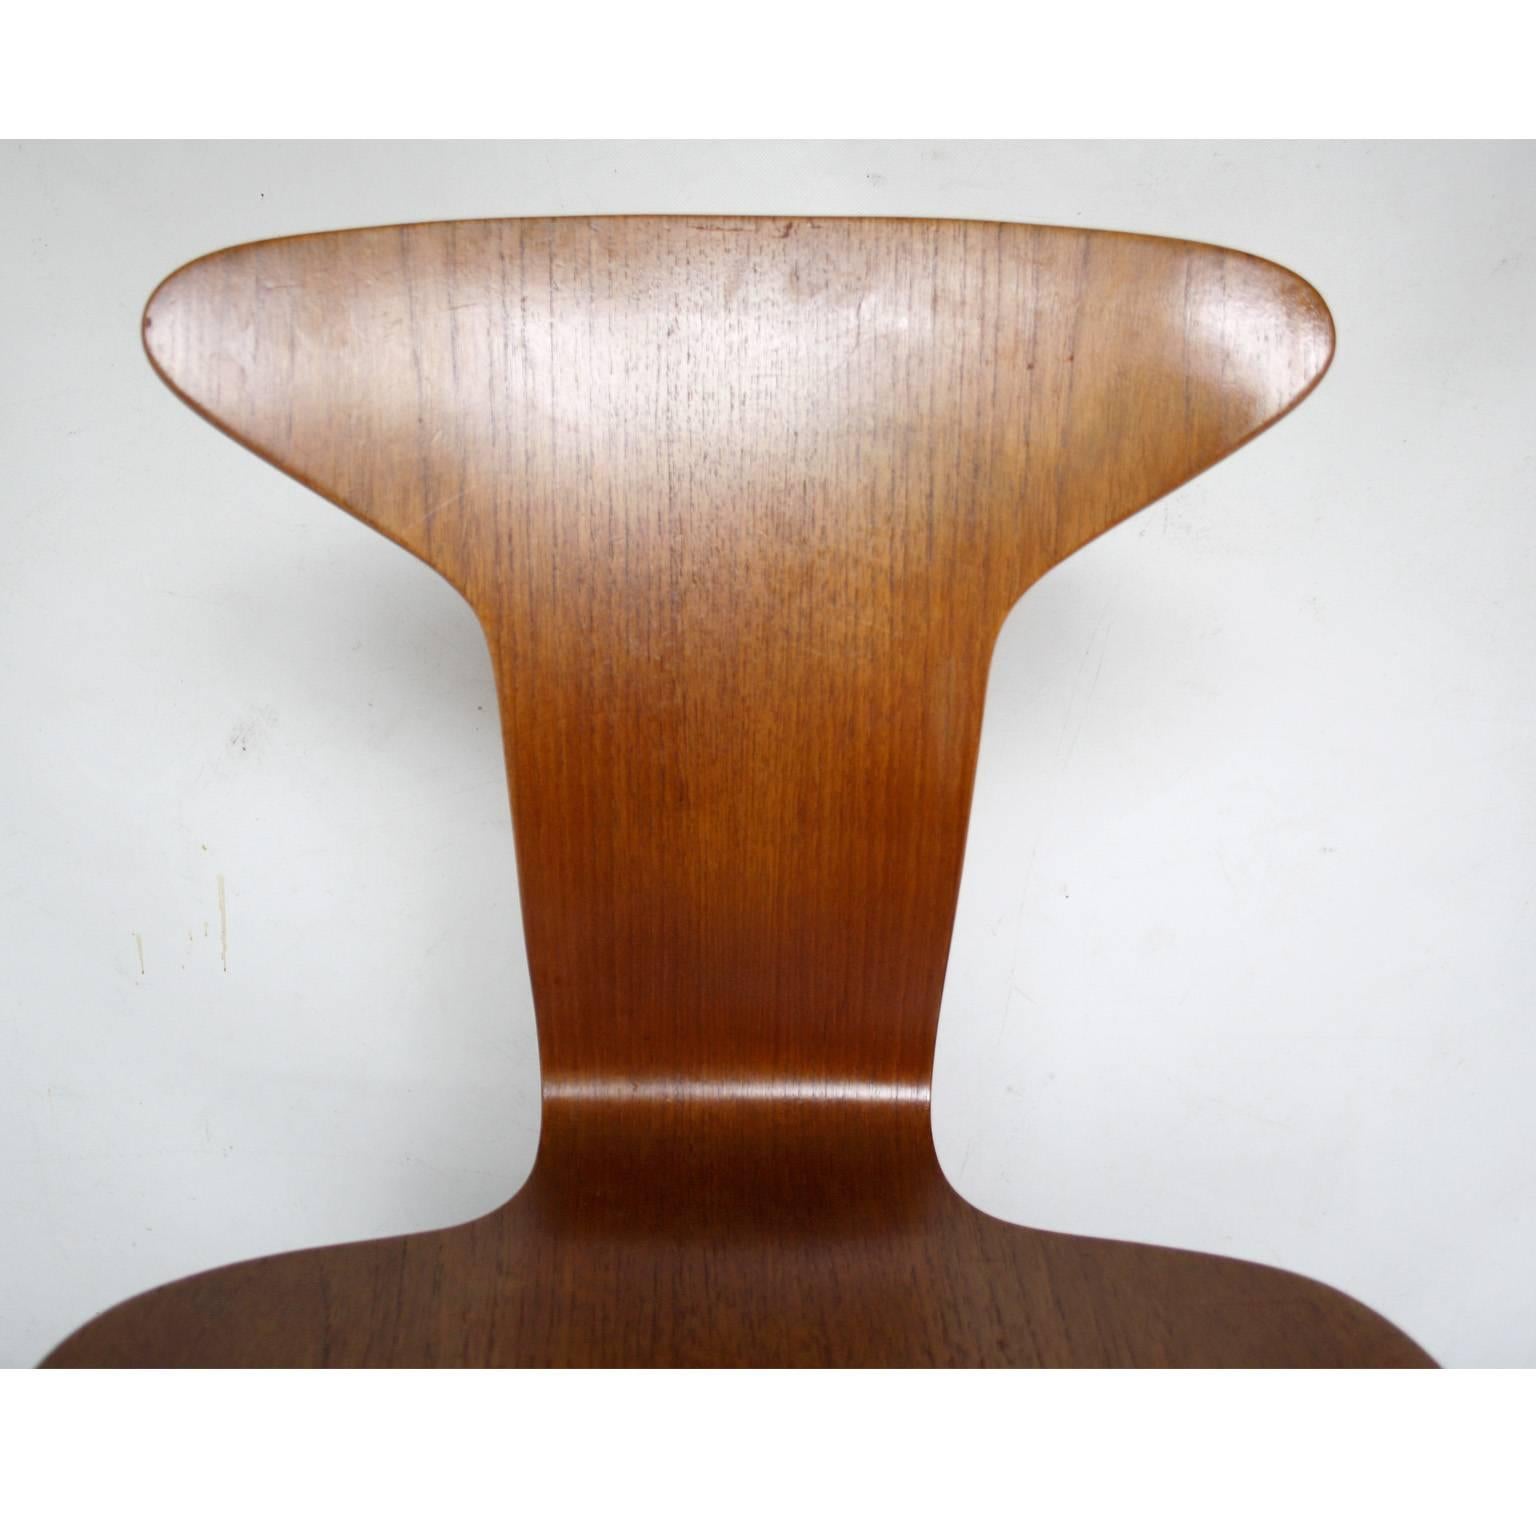 Metal Arne Jacobsen for Fritz Hansen “Mosquito” Dining Chair For Sale